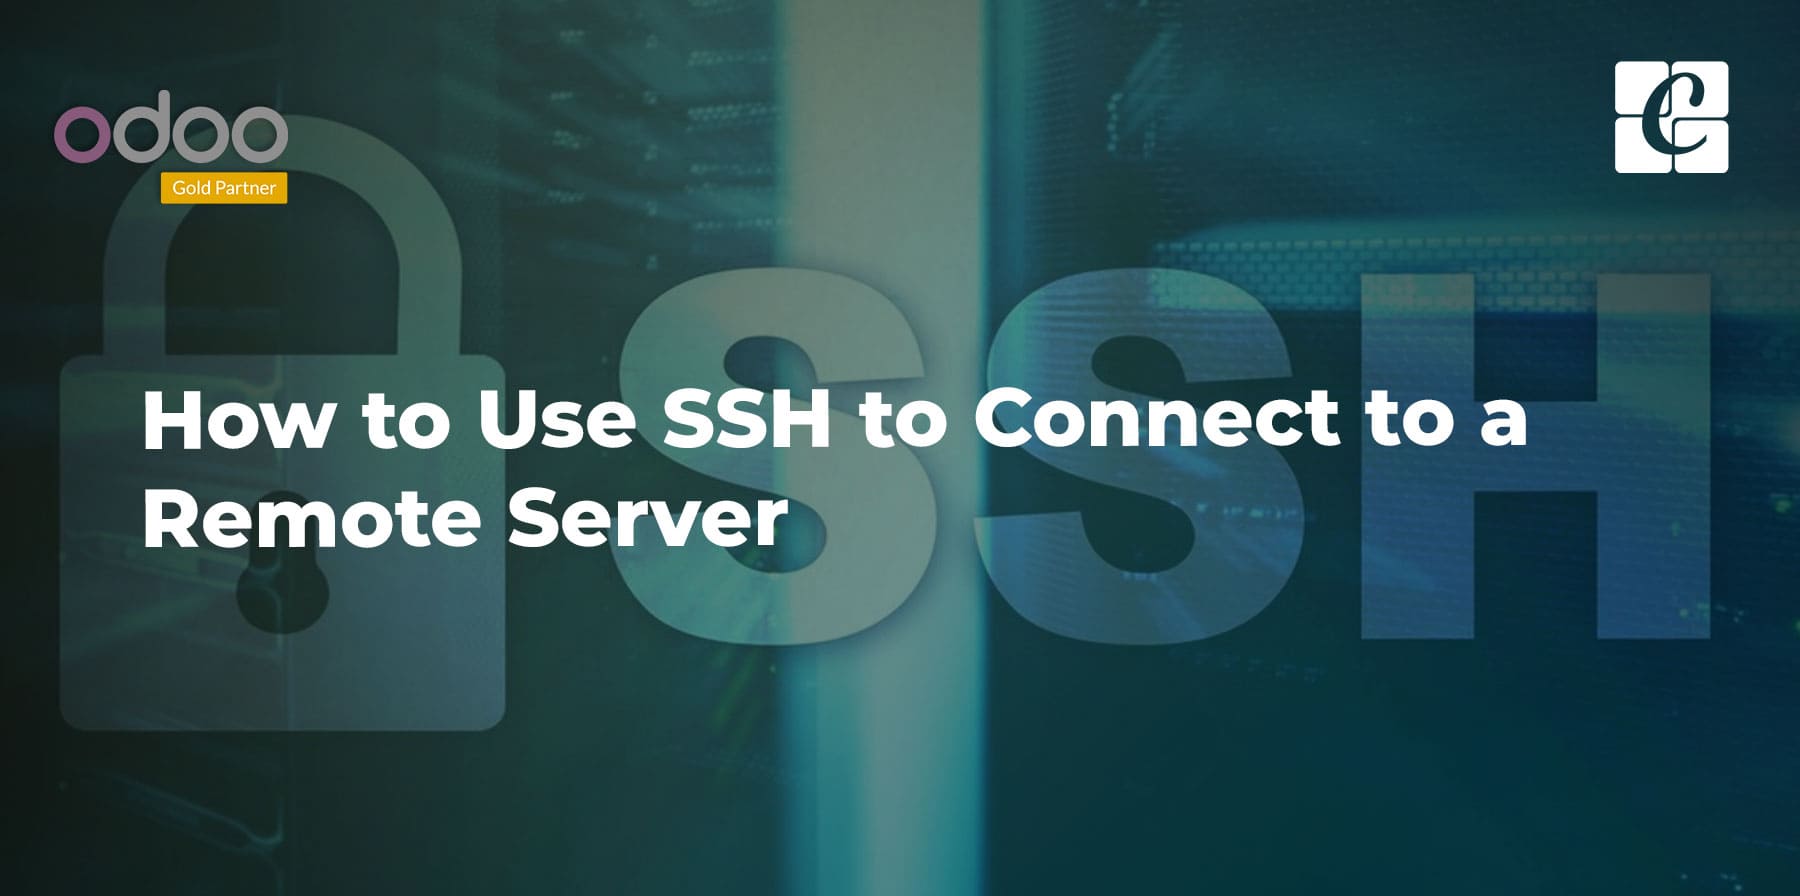 how-to-use-ssh-to-connect-to-a-remote-server.jpg